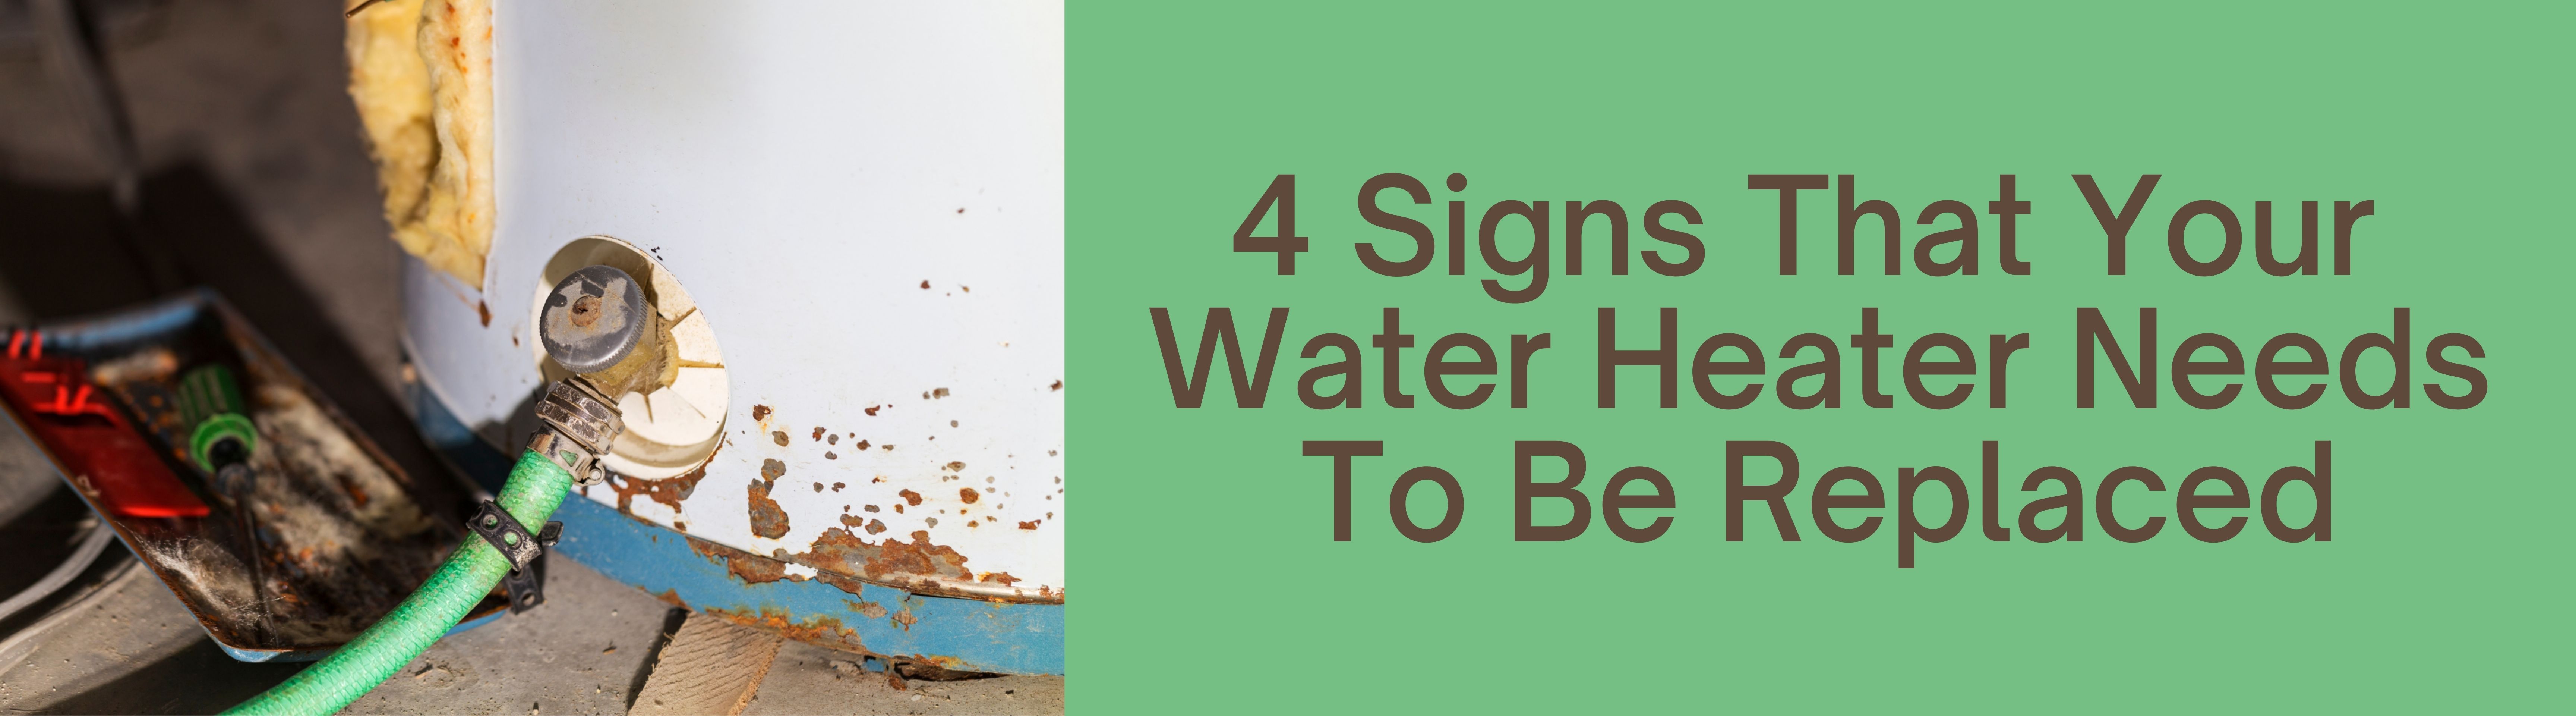 Image for 4 Signs You Might Need Your Water Heater Replaced